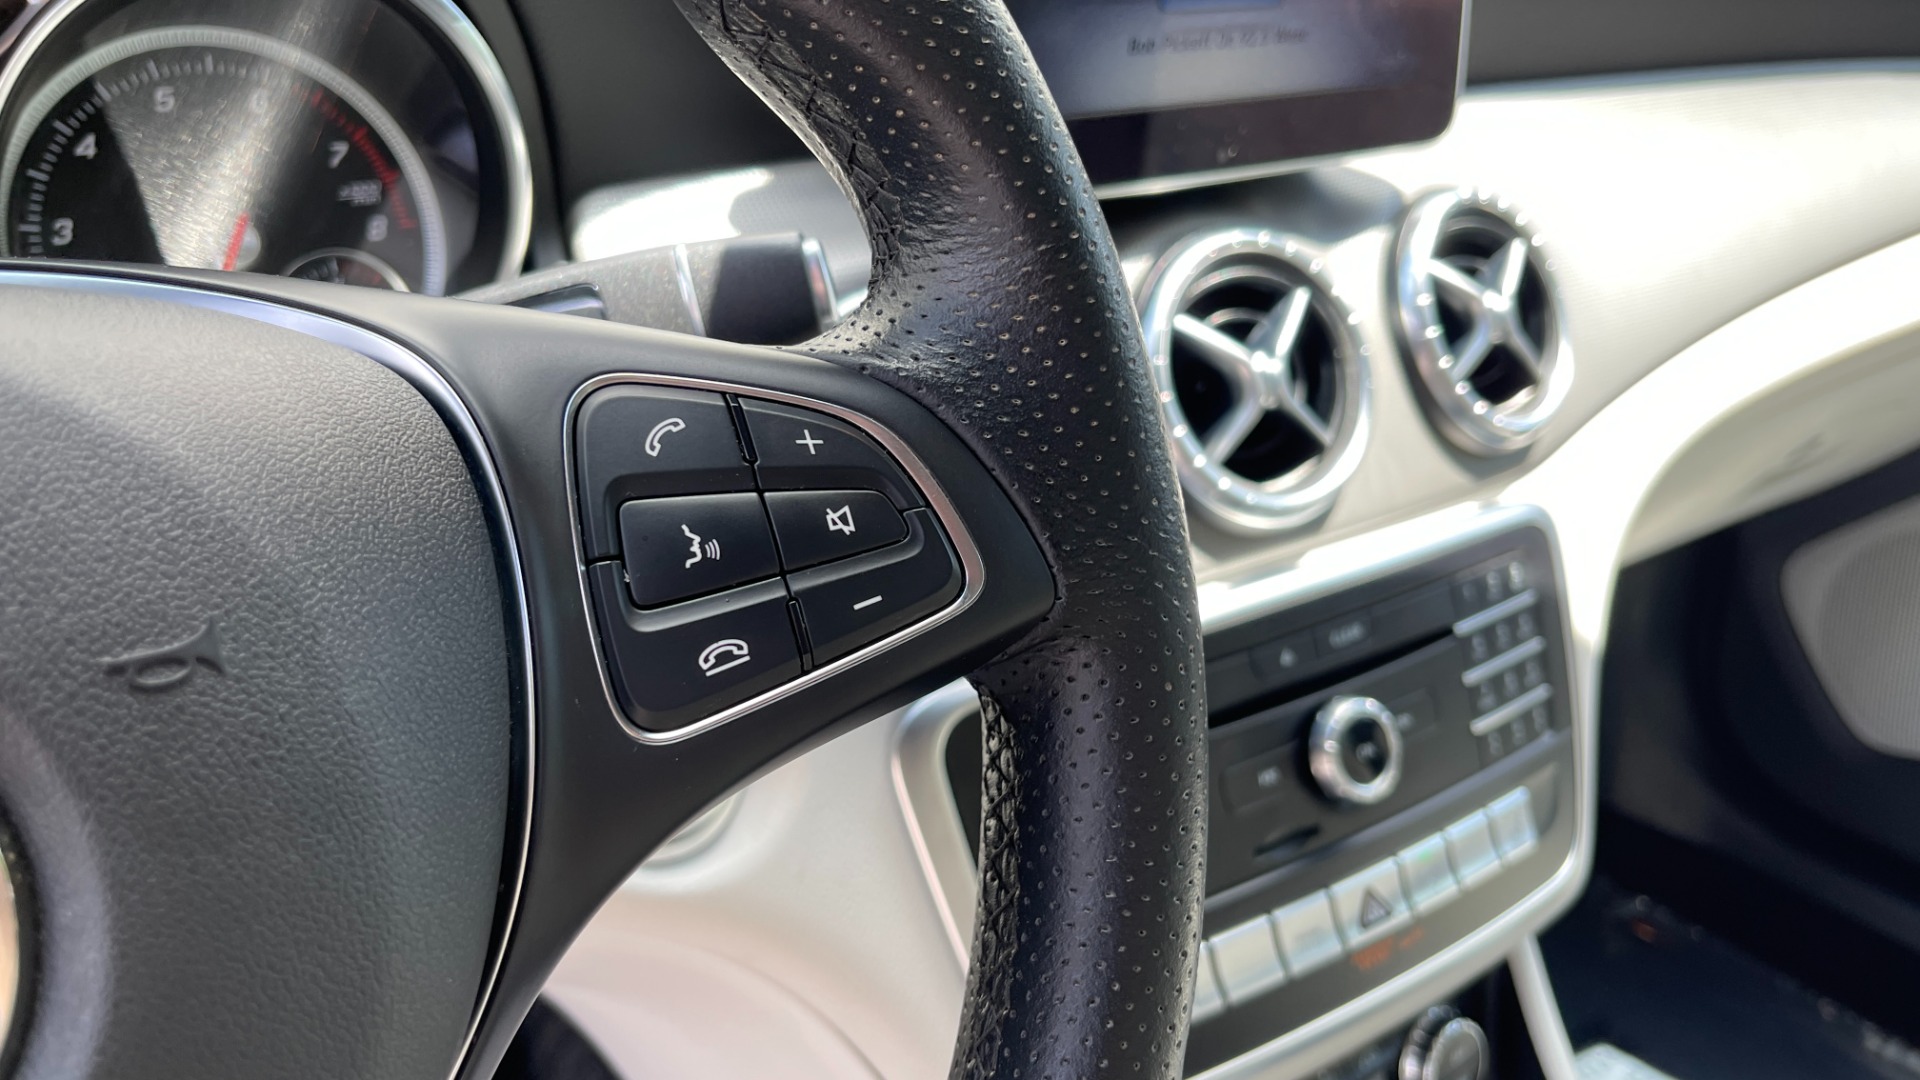 Used 2019 Mercedes-Benz CLA CLA 250 / PANORAMIC ROOF / PREMIUM / CONVENIENCE / HARMAN KARDON SOUND for sale $32,595 at Formula Imports in Charlotte NC 28227 17